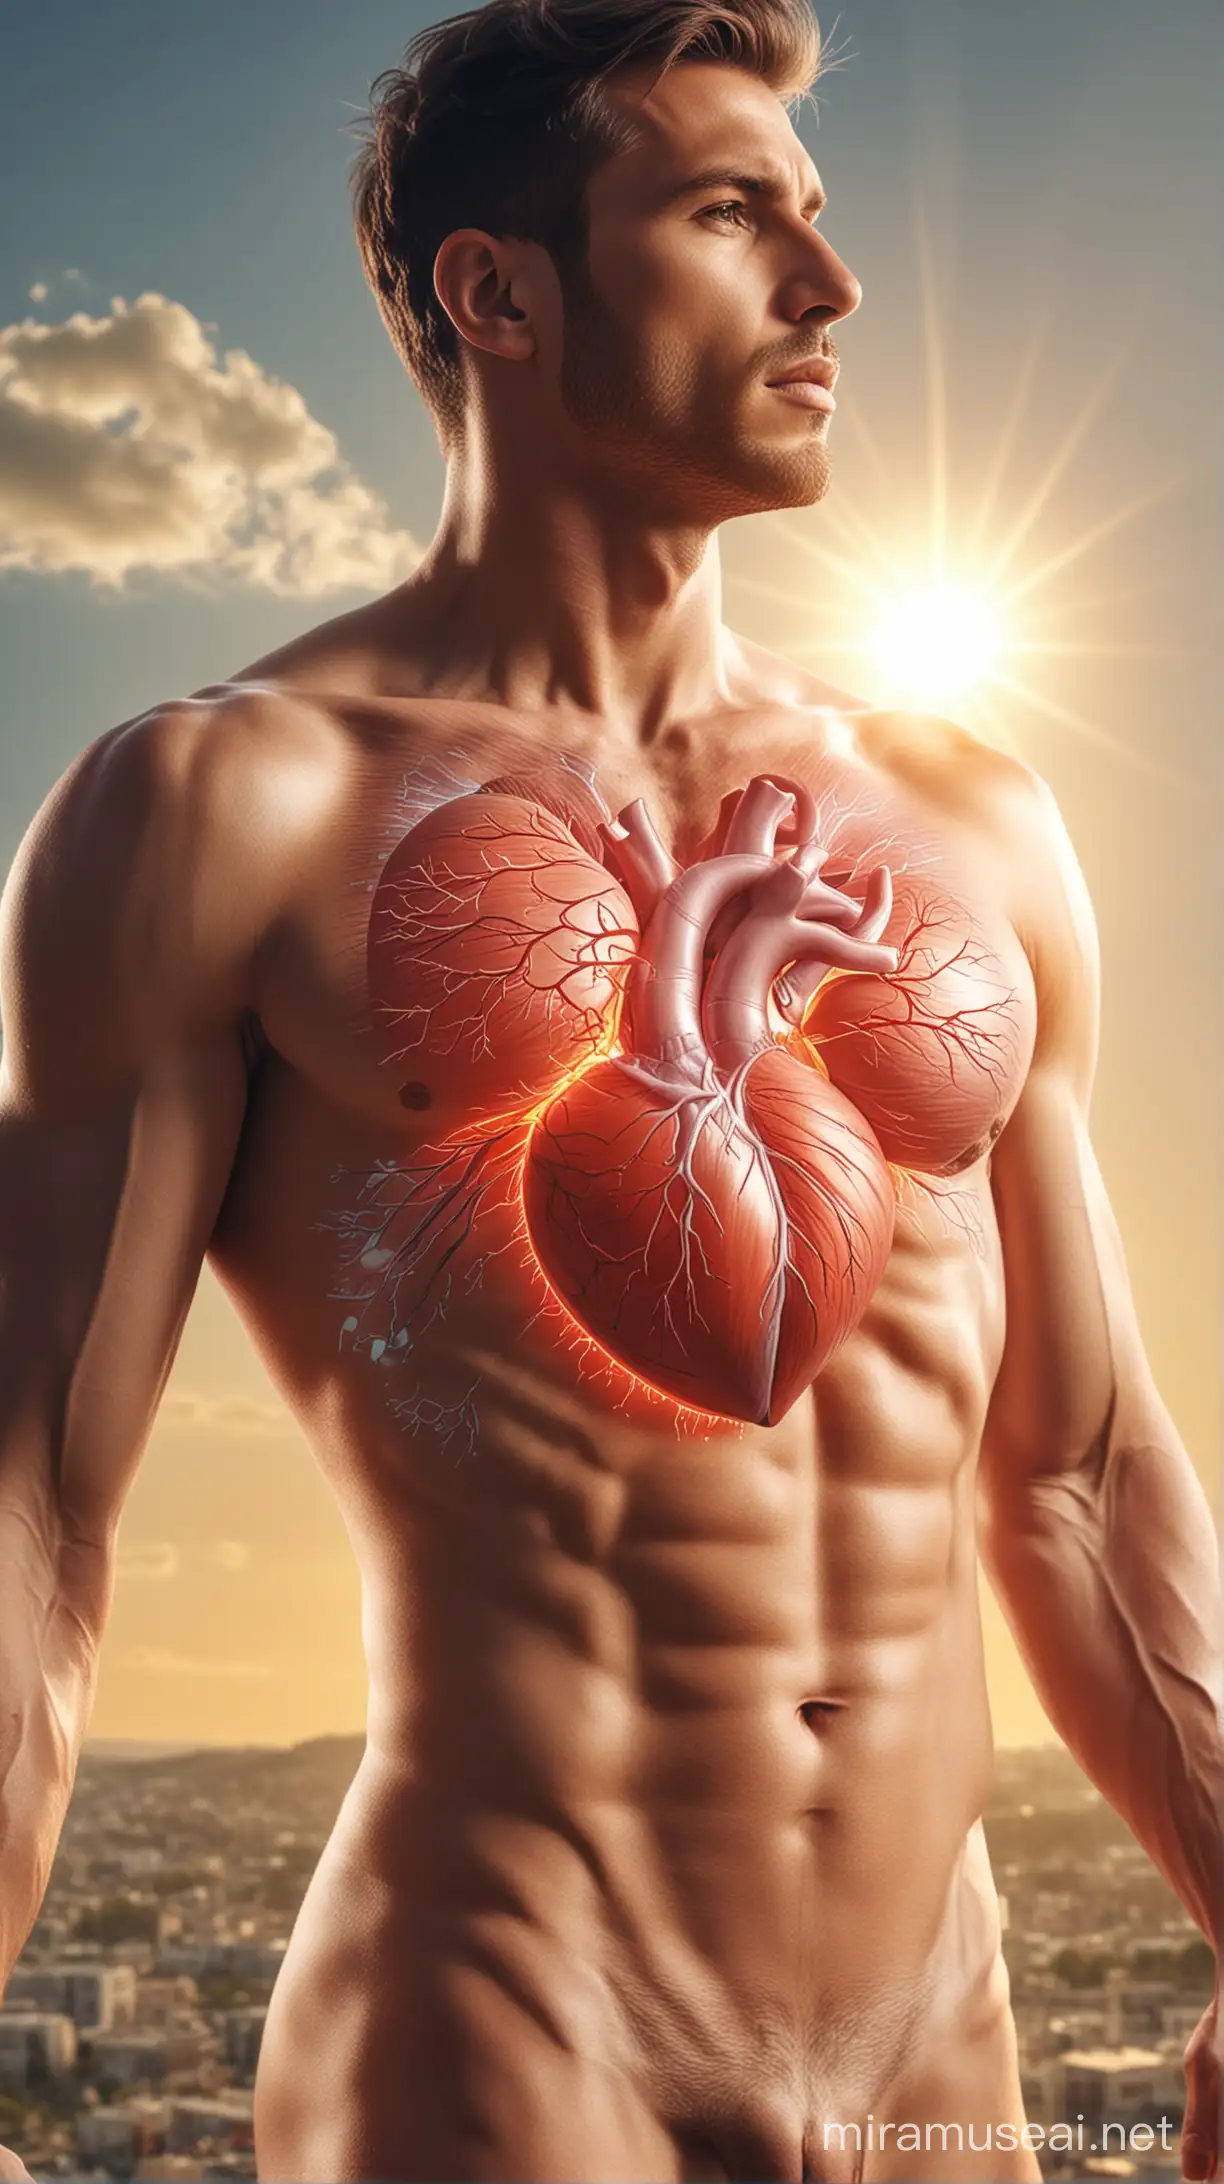 Heart Health diagram man body, natural background, sun light effect, 4k, HDR, morning time weather